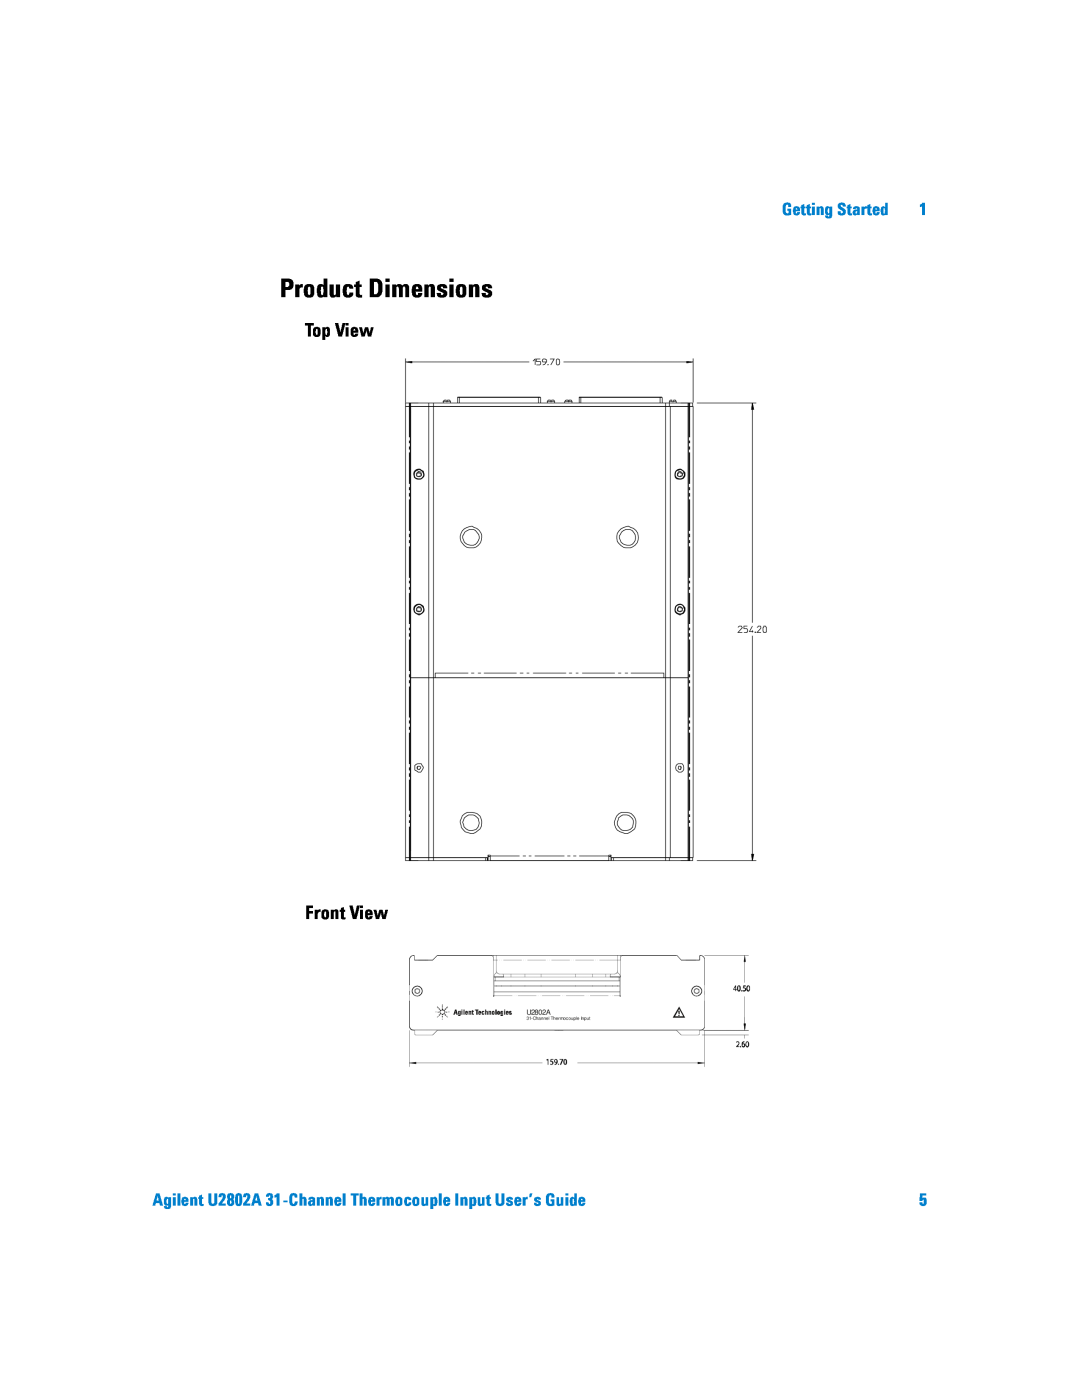 Agilent Technologies U2802A manual Product Dimensions, Top View Front View, Getting Started, ChannelThermocouple Input 